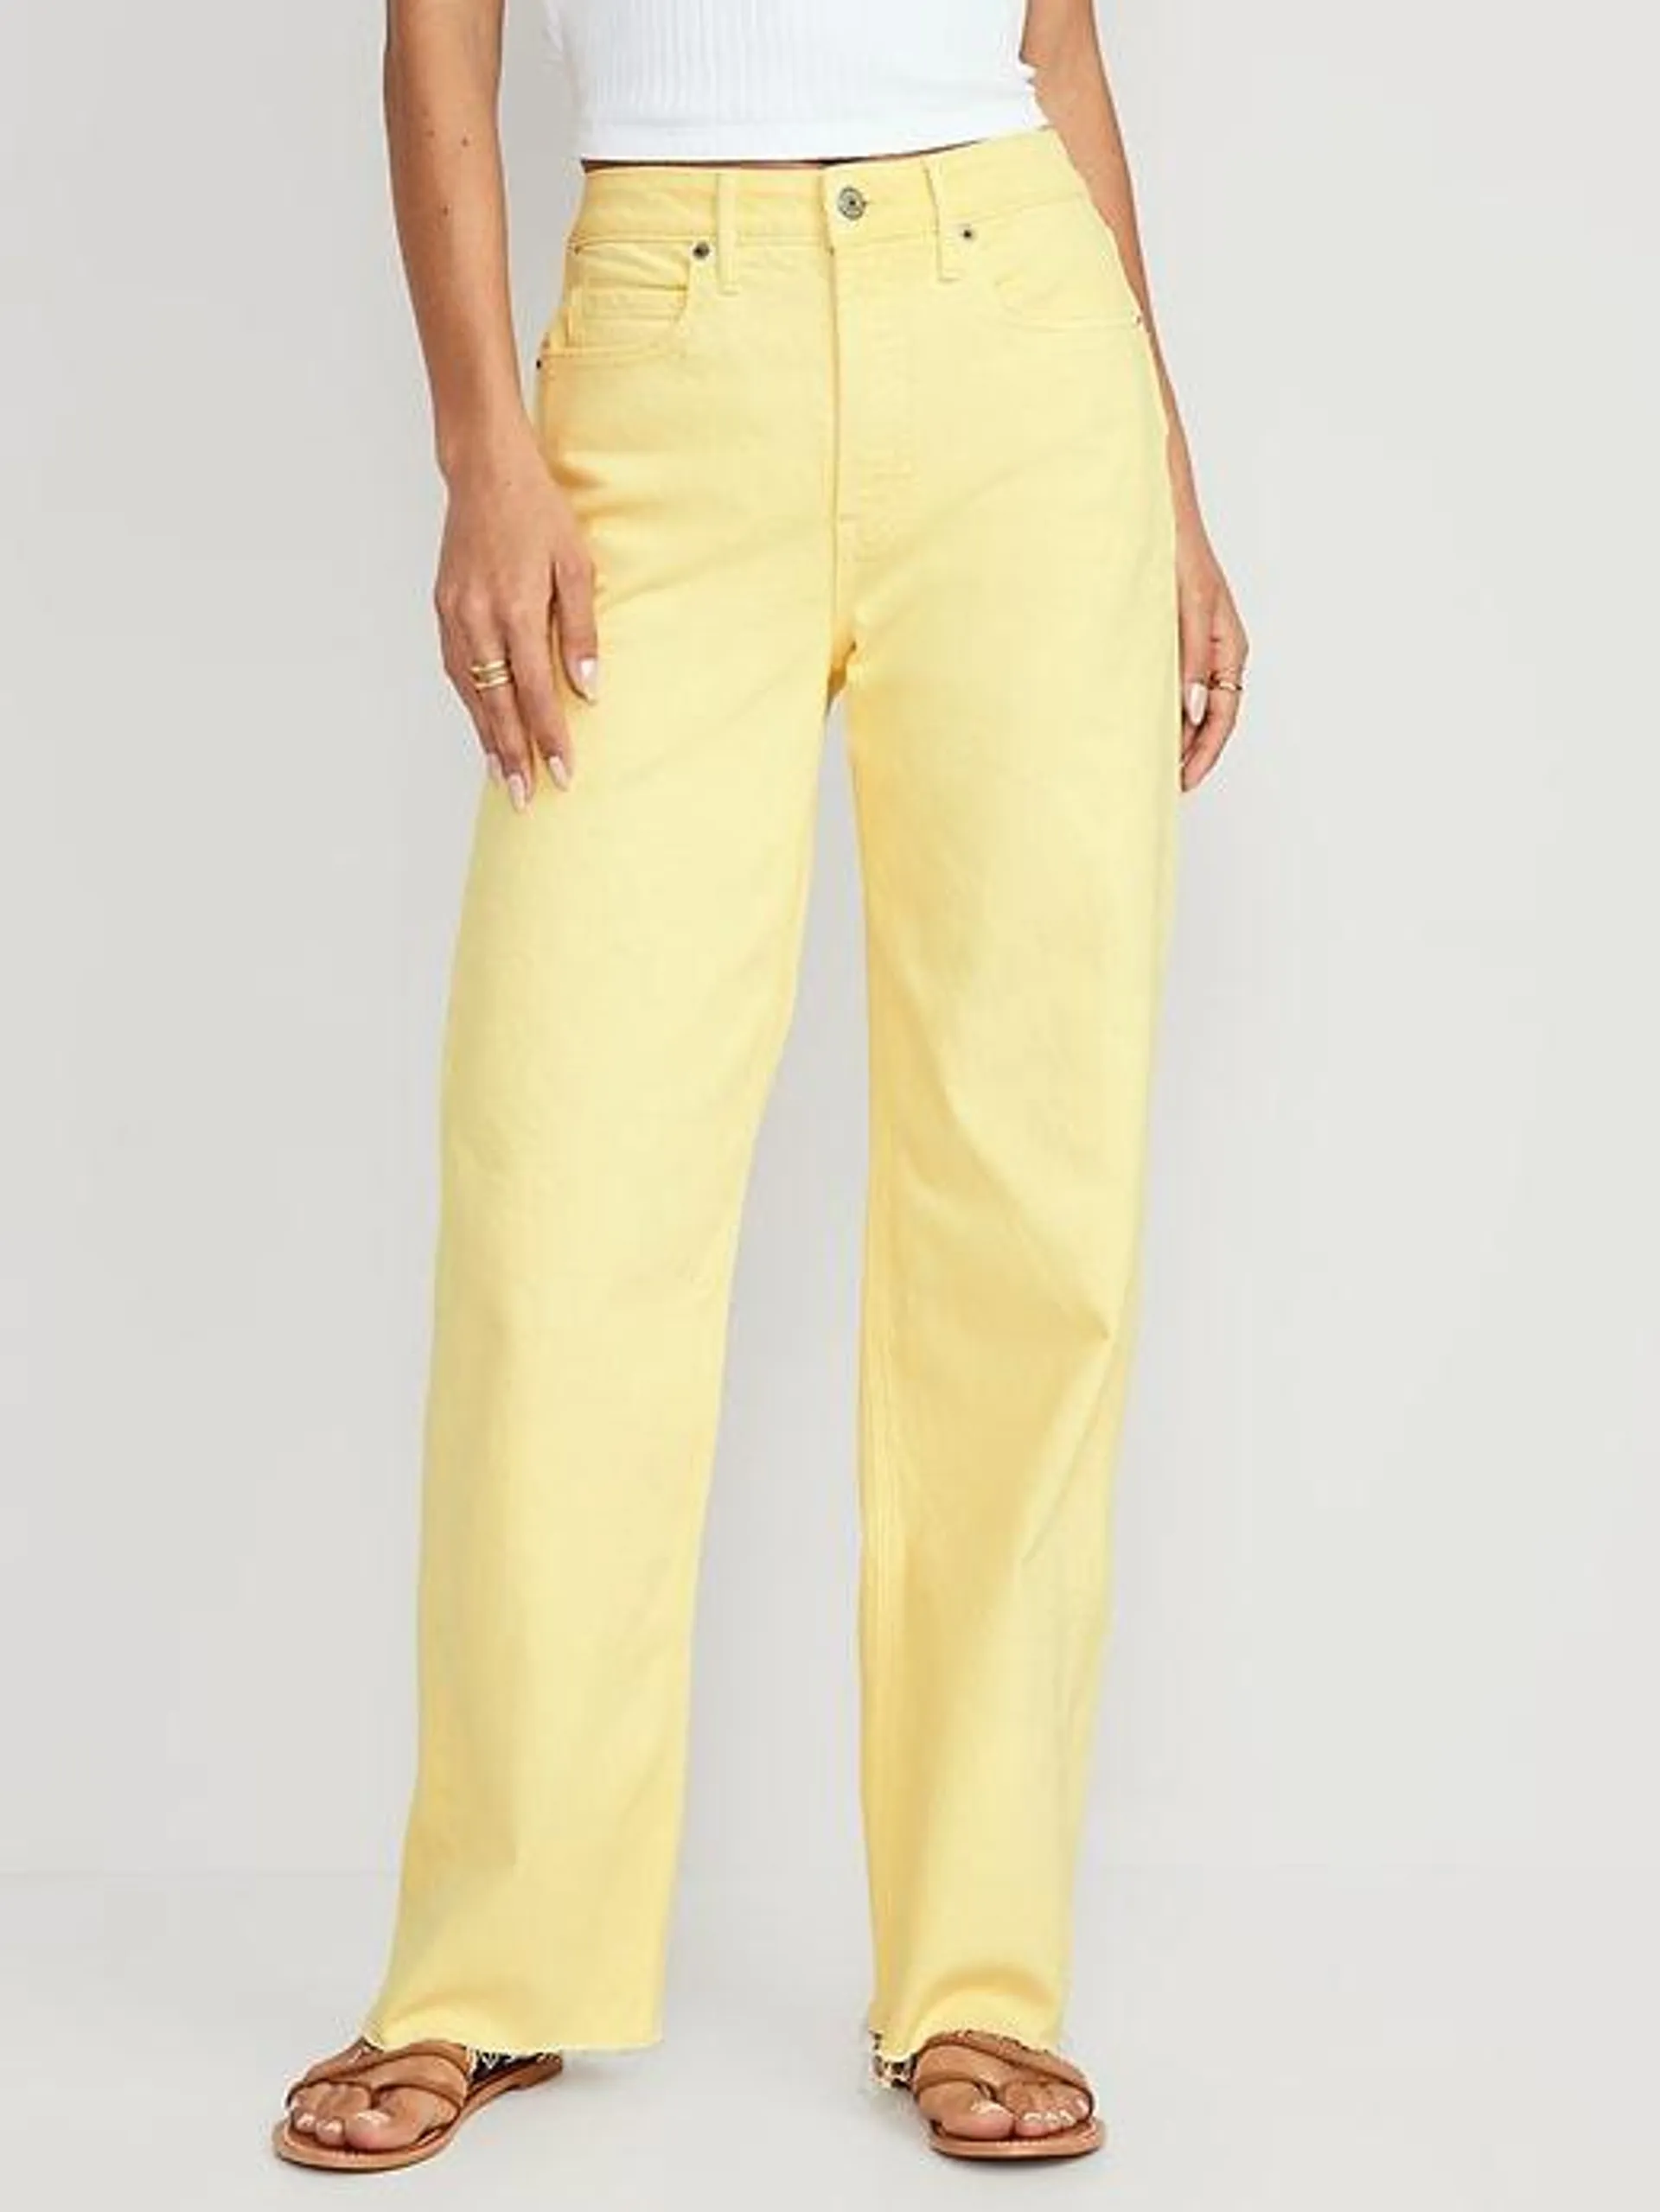 Extra High-Waisted Pop-Color Wide-Leg Cut-Off Jeans for Women